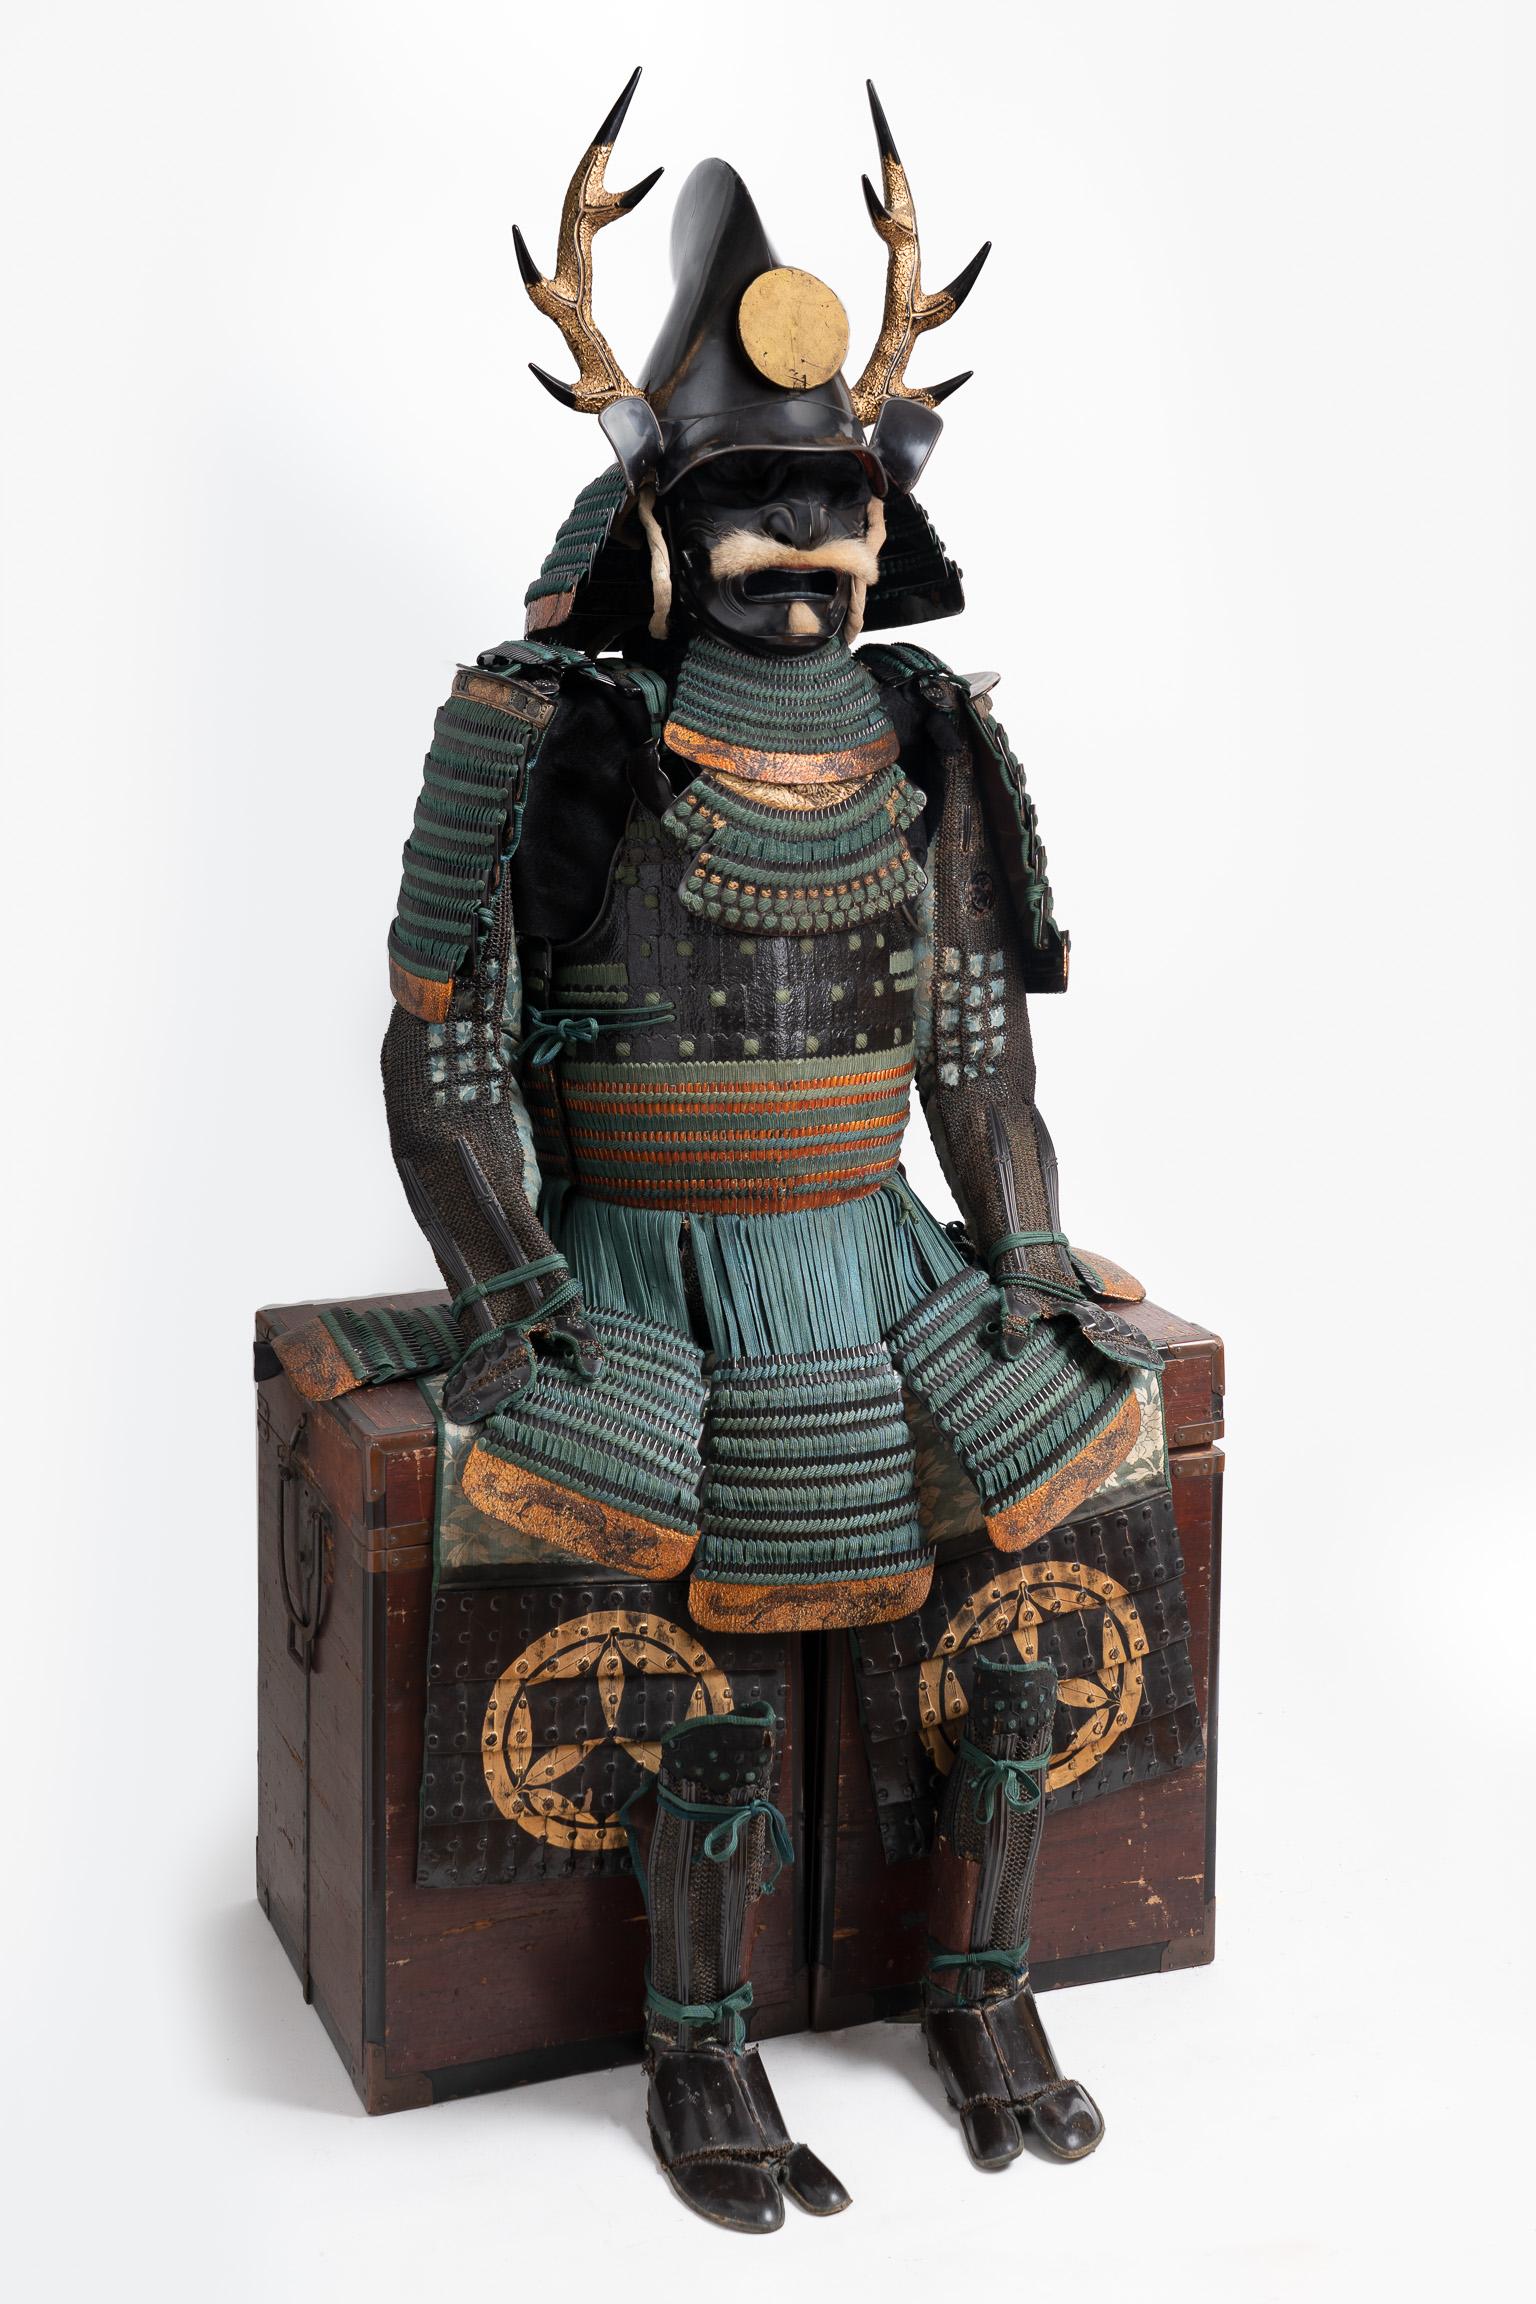 Dangae do tosei gusoku
A blue-laced samurai armor with cuirass of double style

Edo Period, 18th century

 

Kabuto [helmet]: Black lacquered eboshi-nari kabuto, in the form of this court cap. The helmet is fitted with  beautiful original side